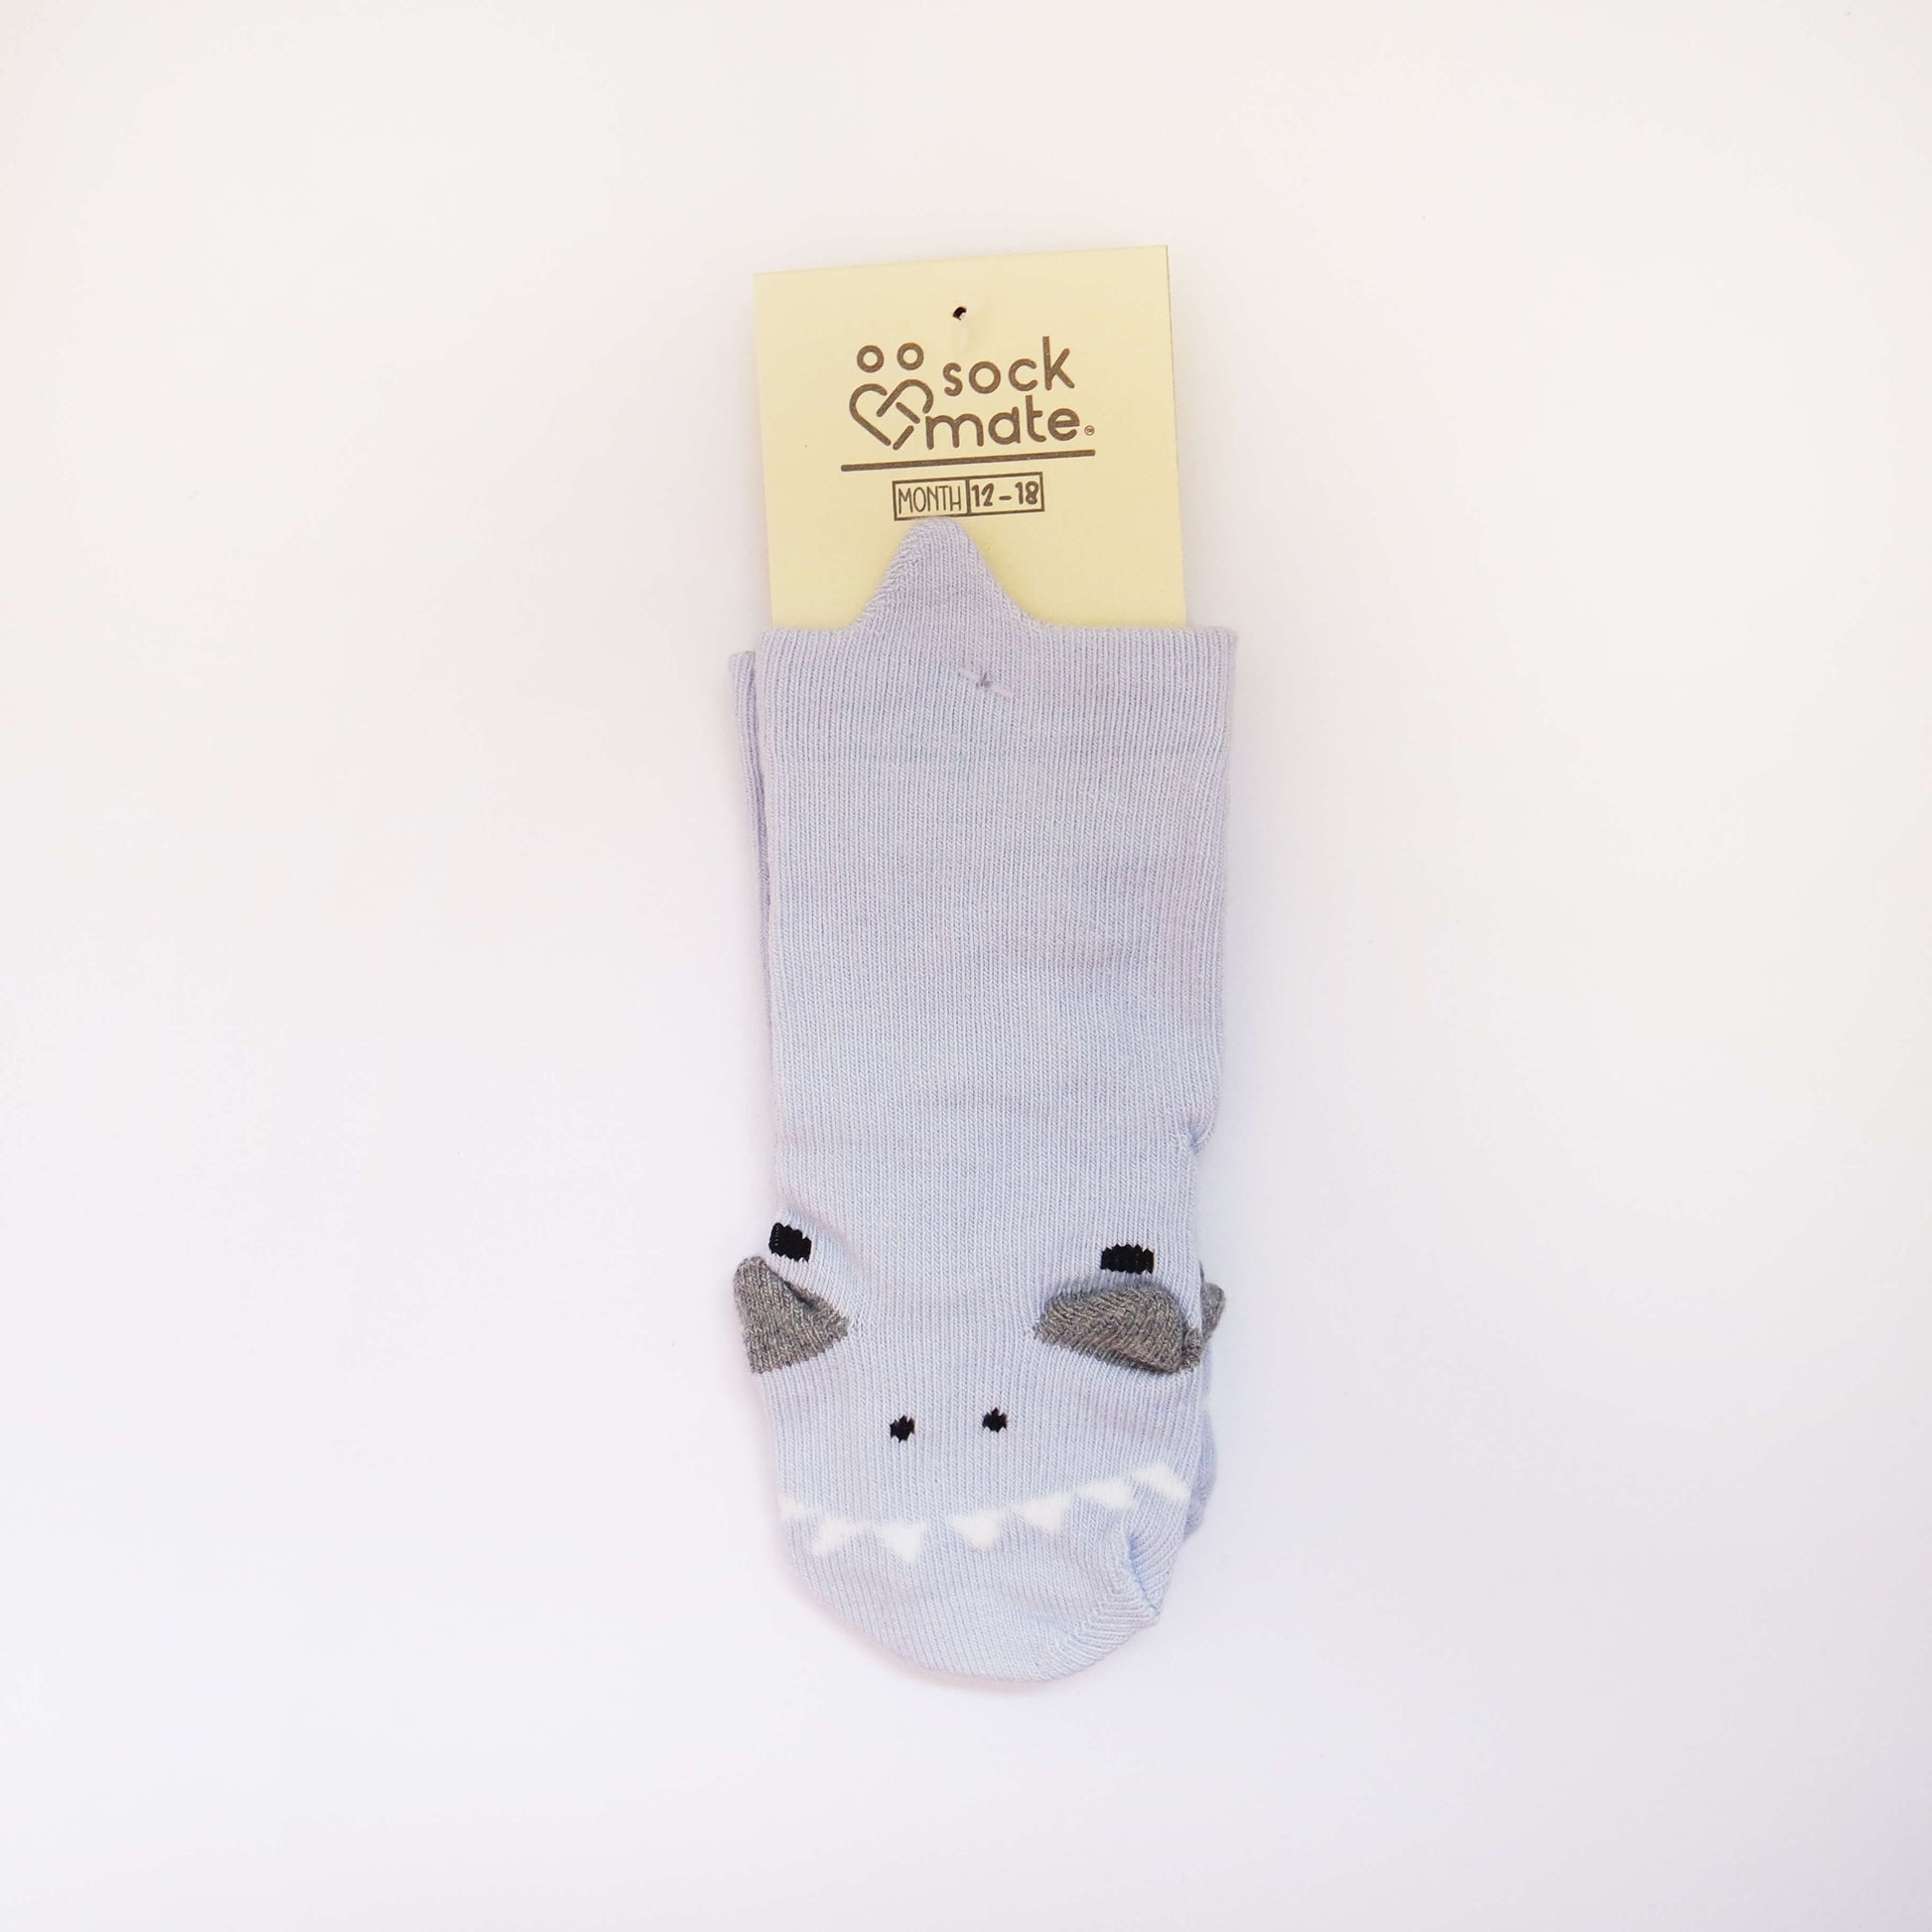  3D blue dinosaur baby socks, featuring adorable and lifelike dinosaur designs for a playful and cute look.